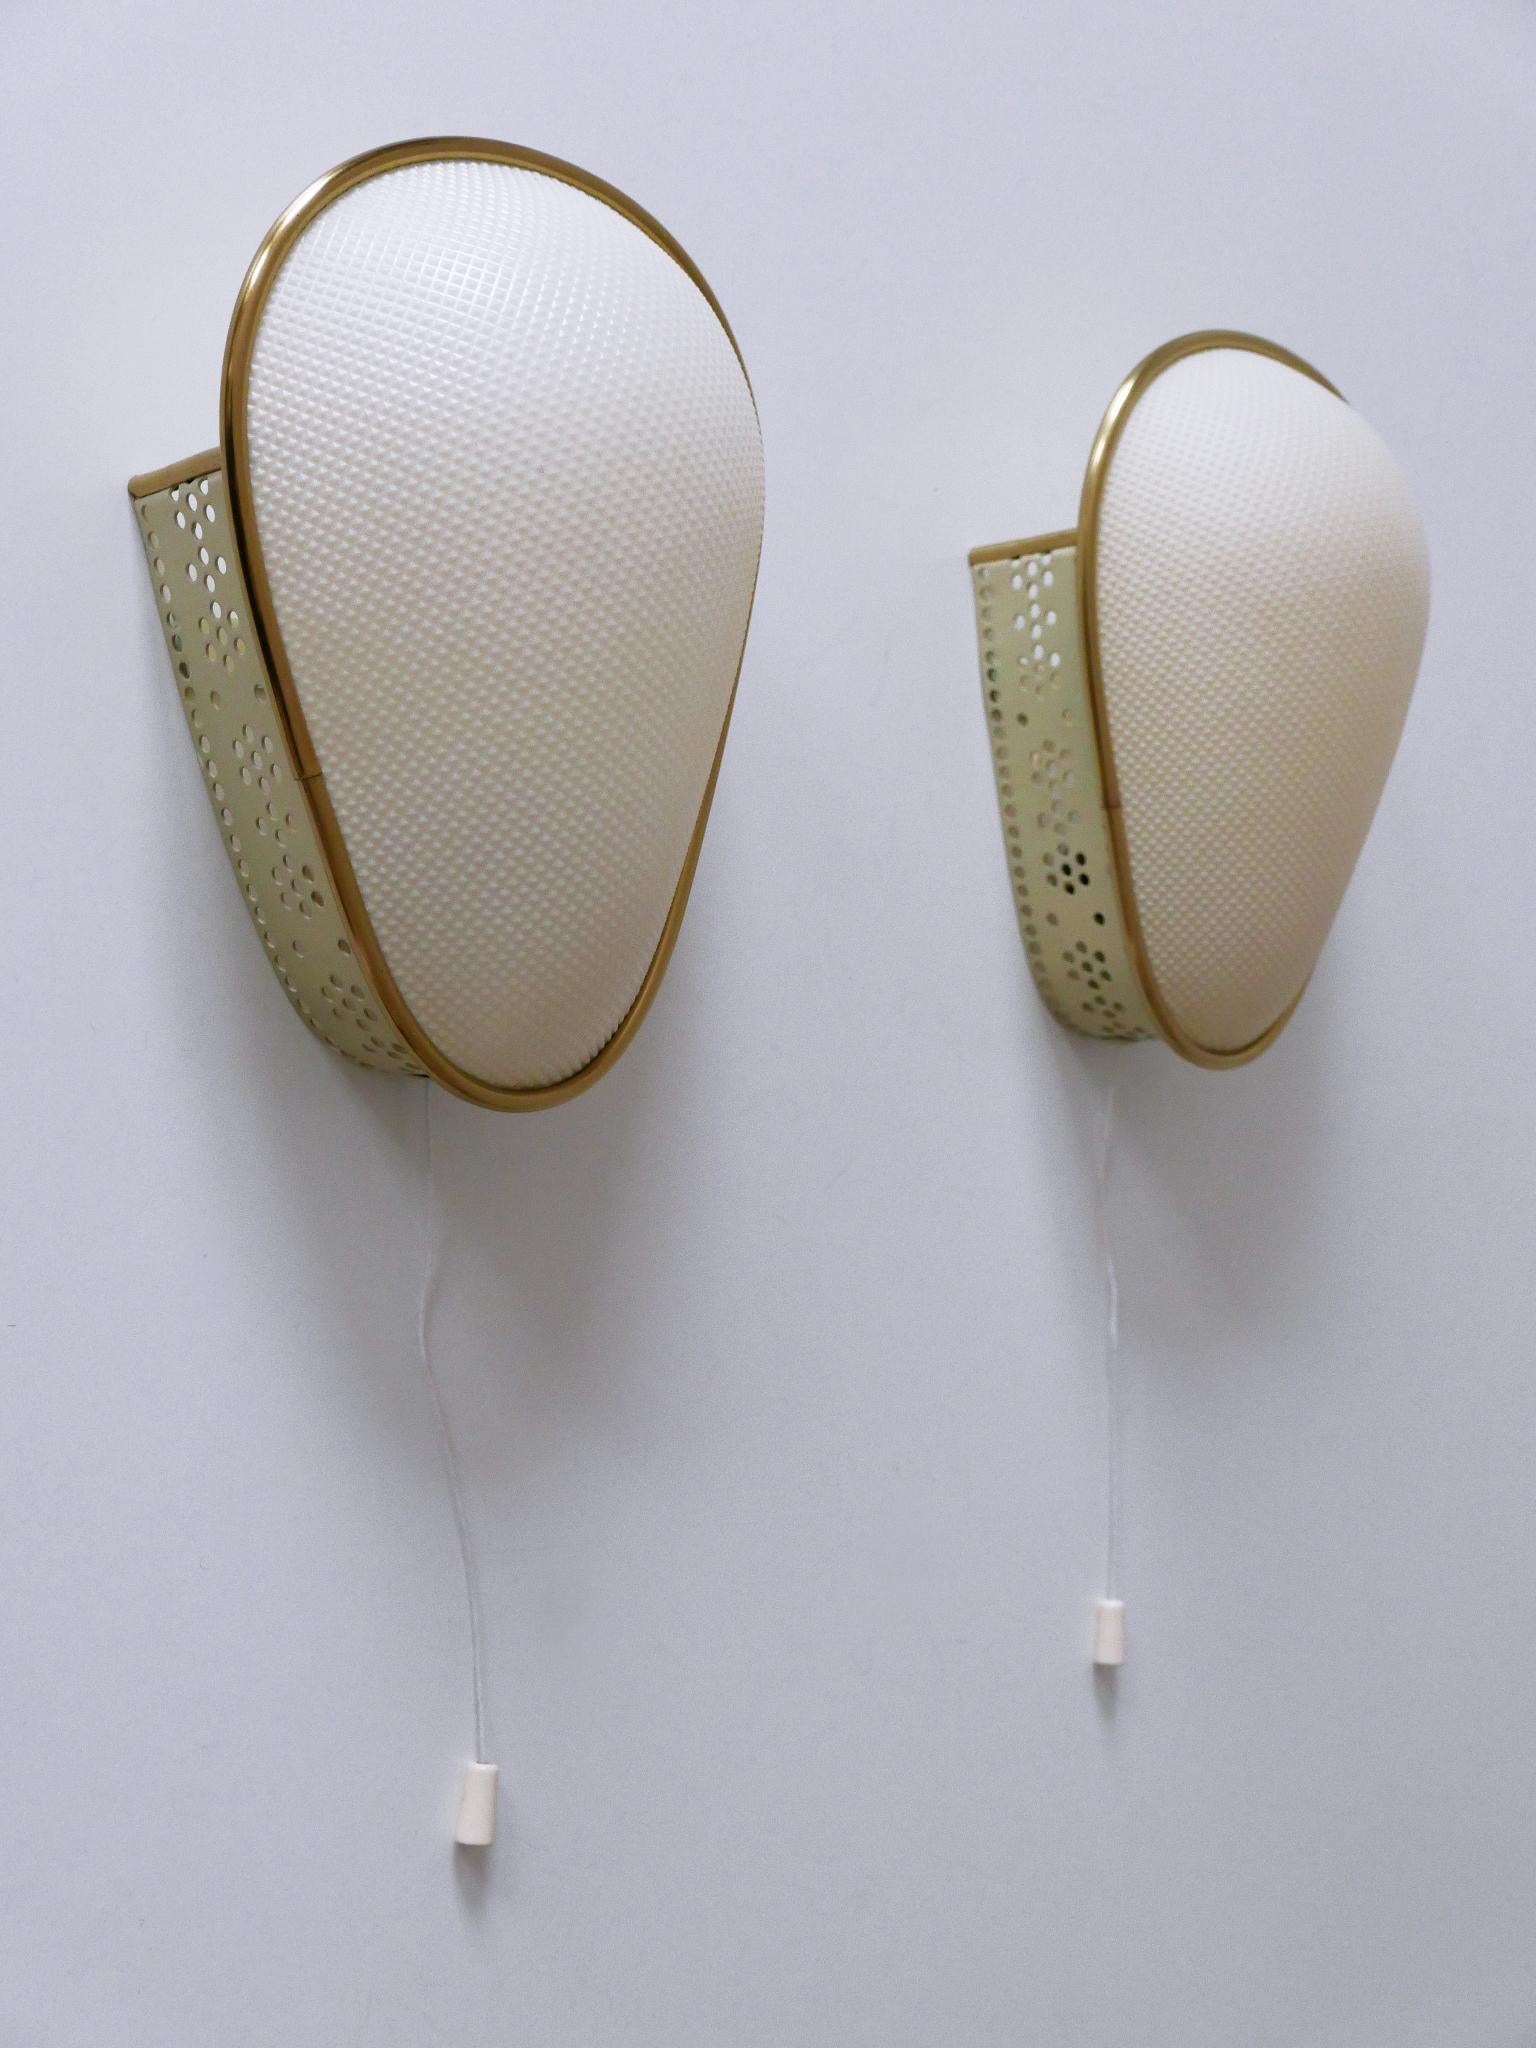 Set of Two Rare & Elegant Mid-Century Modern Sconces or Wall Lamps Germany 1950s For Sale 8